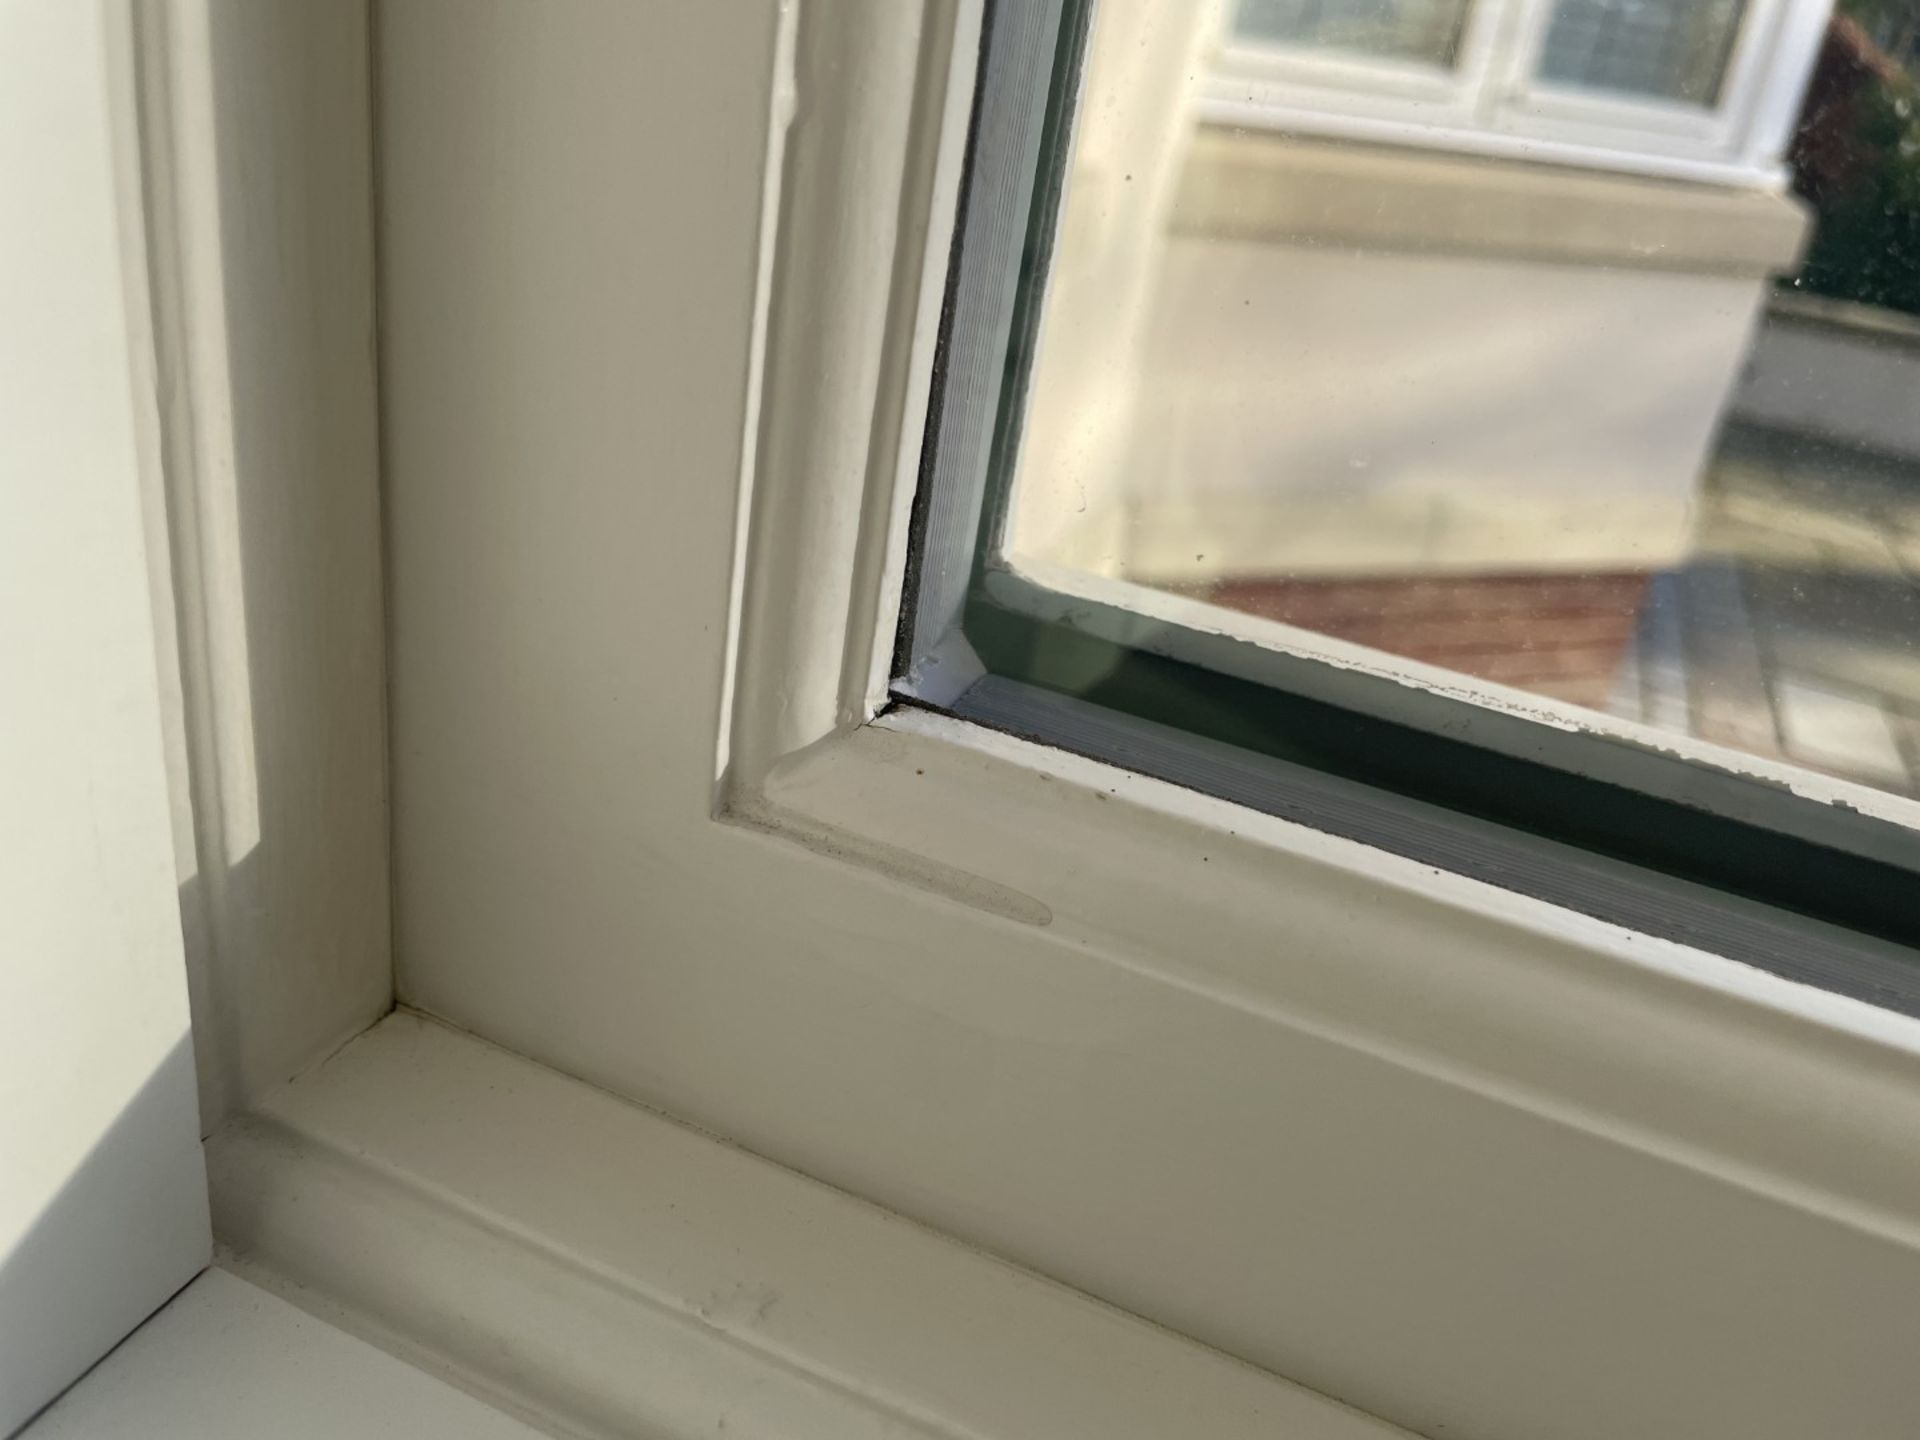 1 x Hardwood Timber Double Glazed Window Frames fitted with Shutter Blinds, In White - Ref: PAN106 - Image 16 of 23